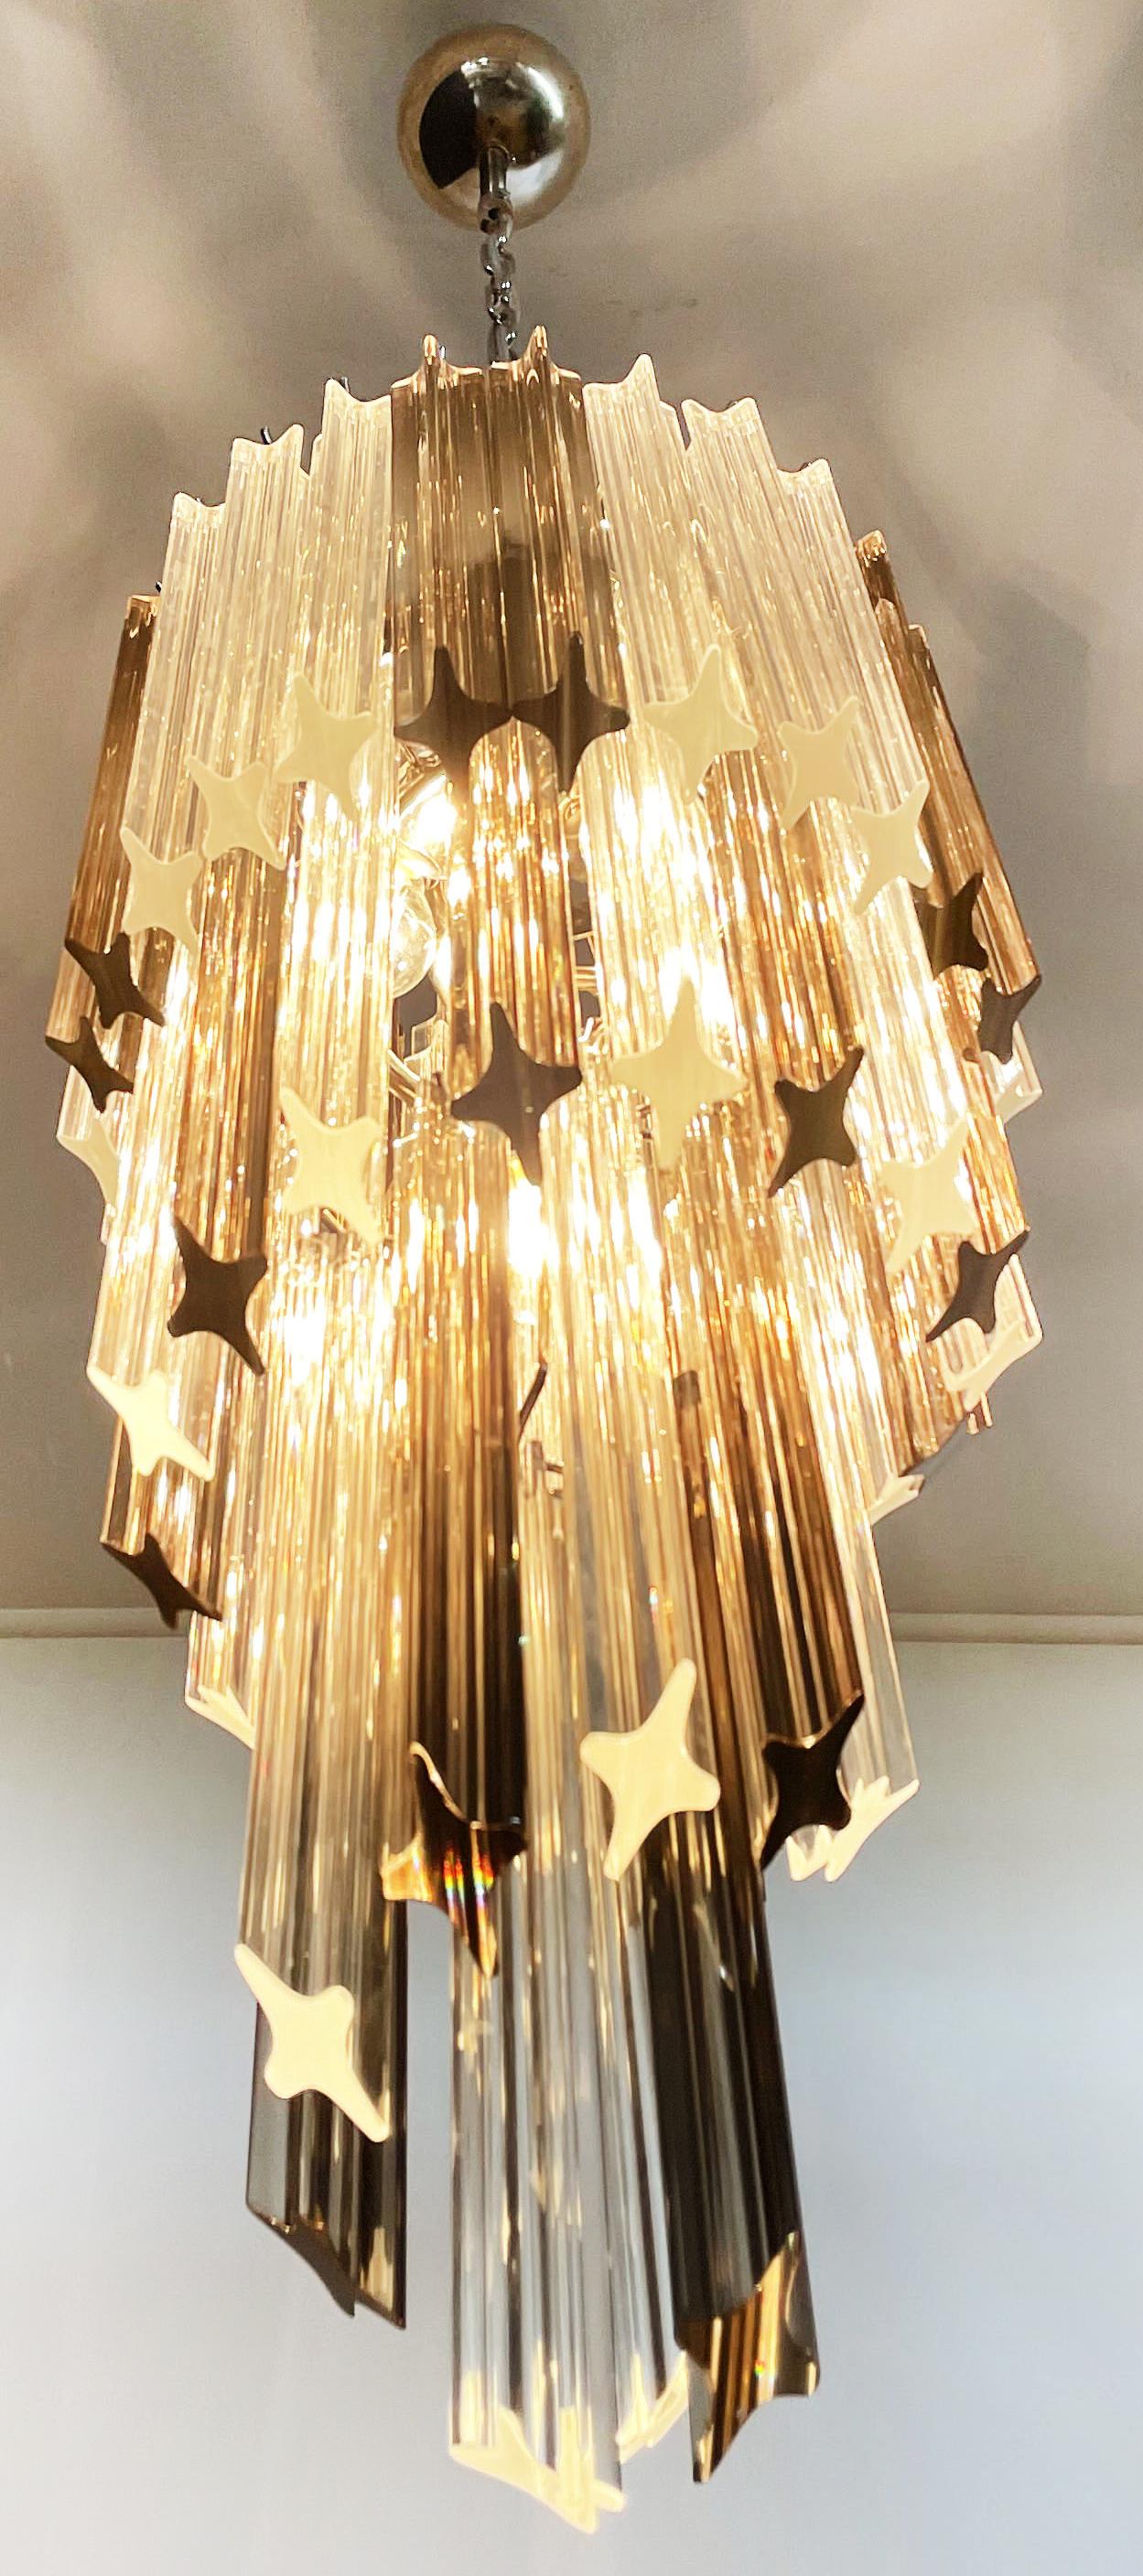 Italian Sophisticated Murano Chandeliers – 54 quadriedri prisms transparent and smoked For Sale